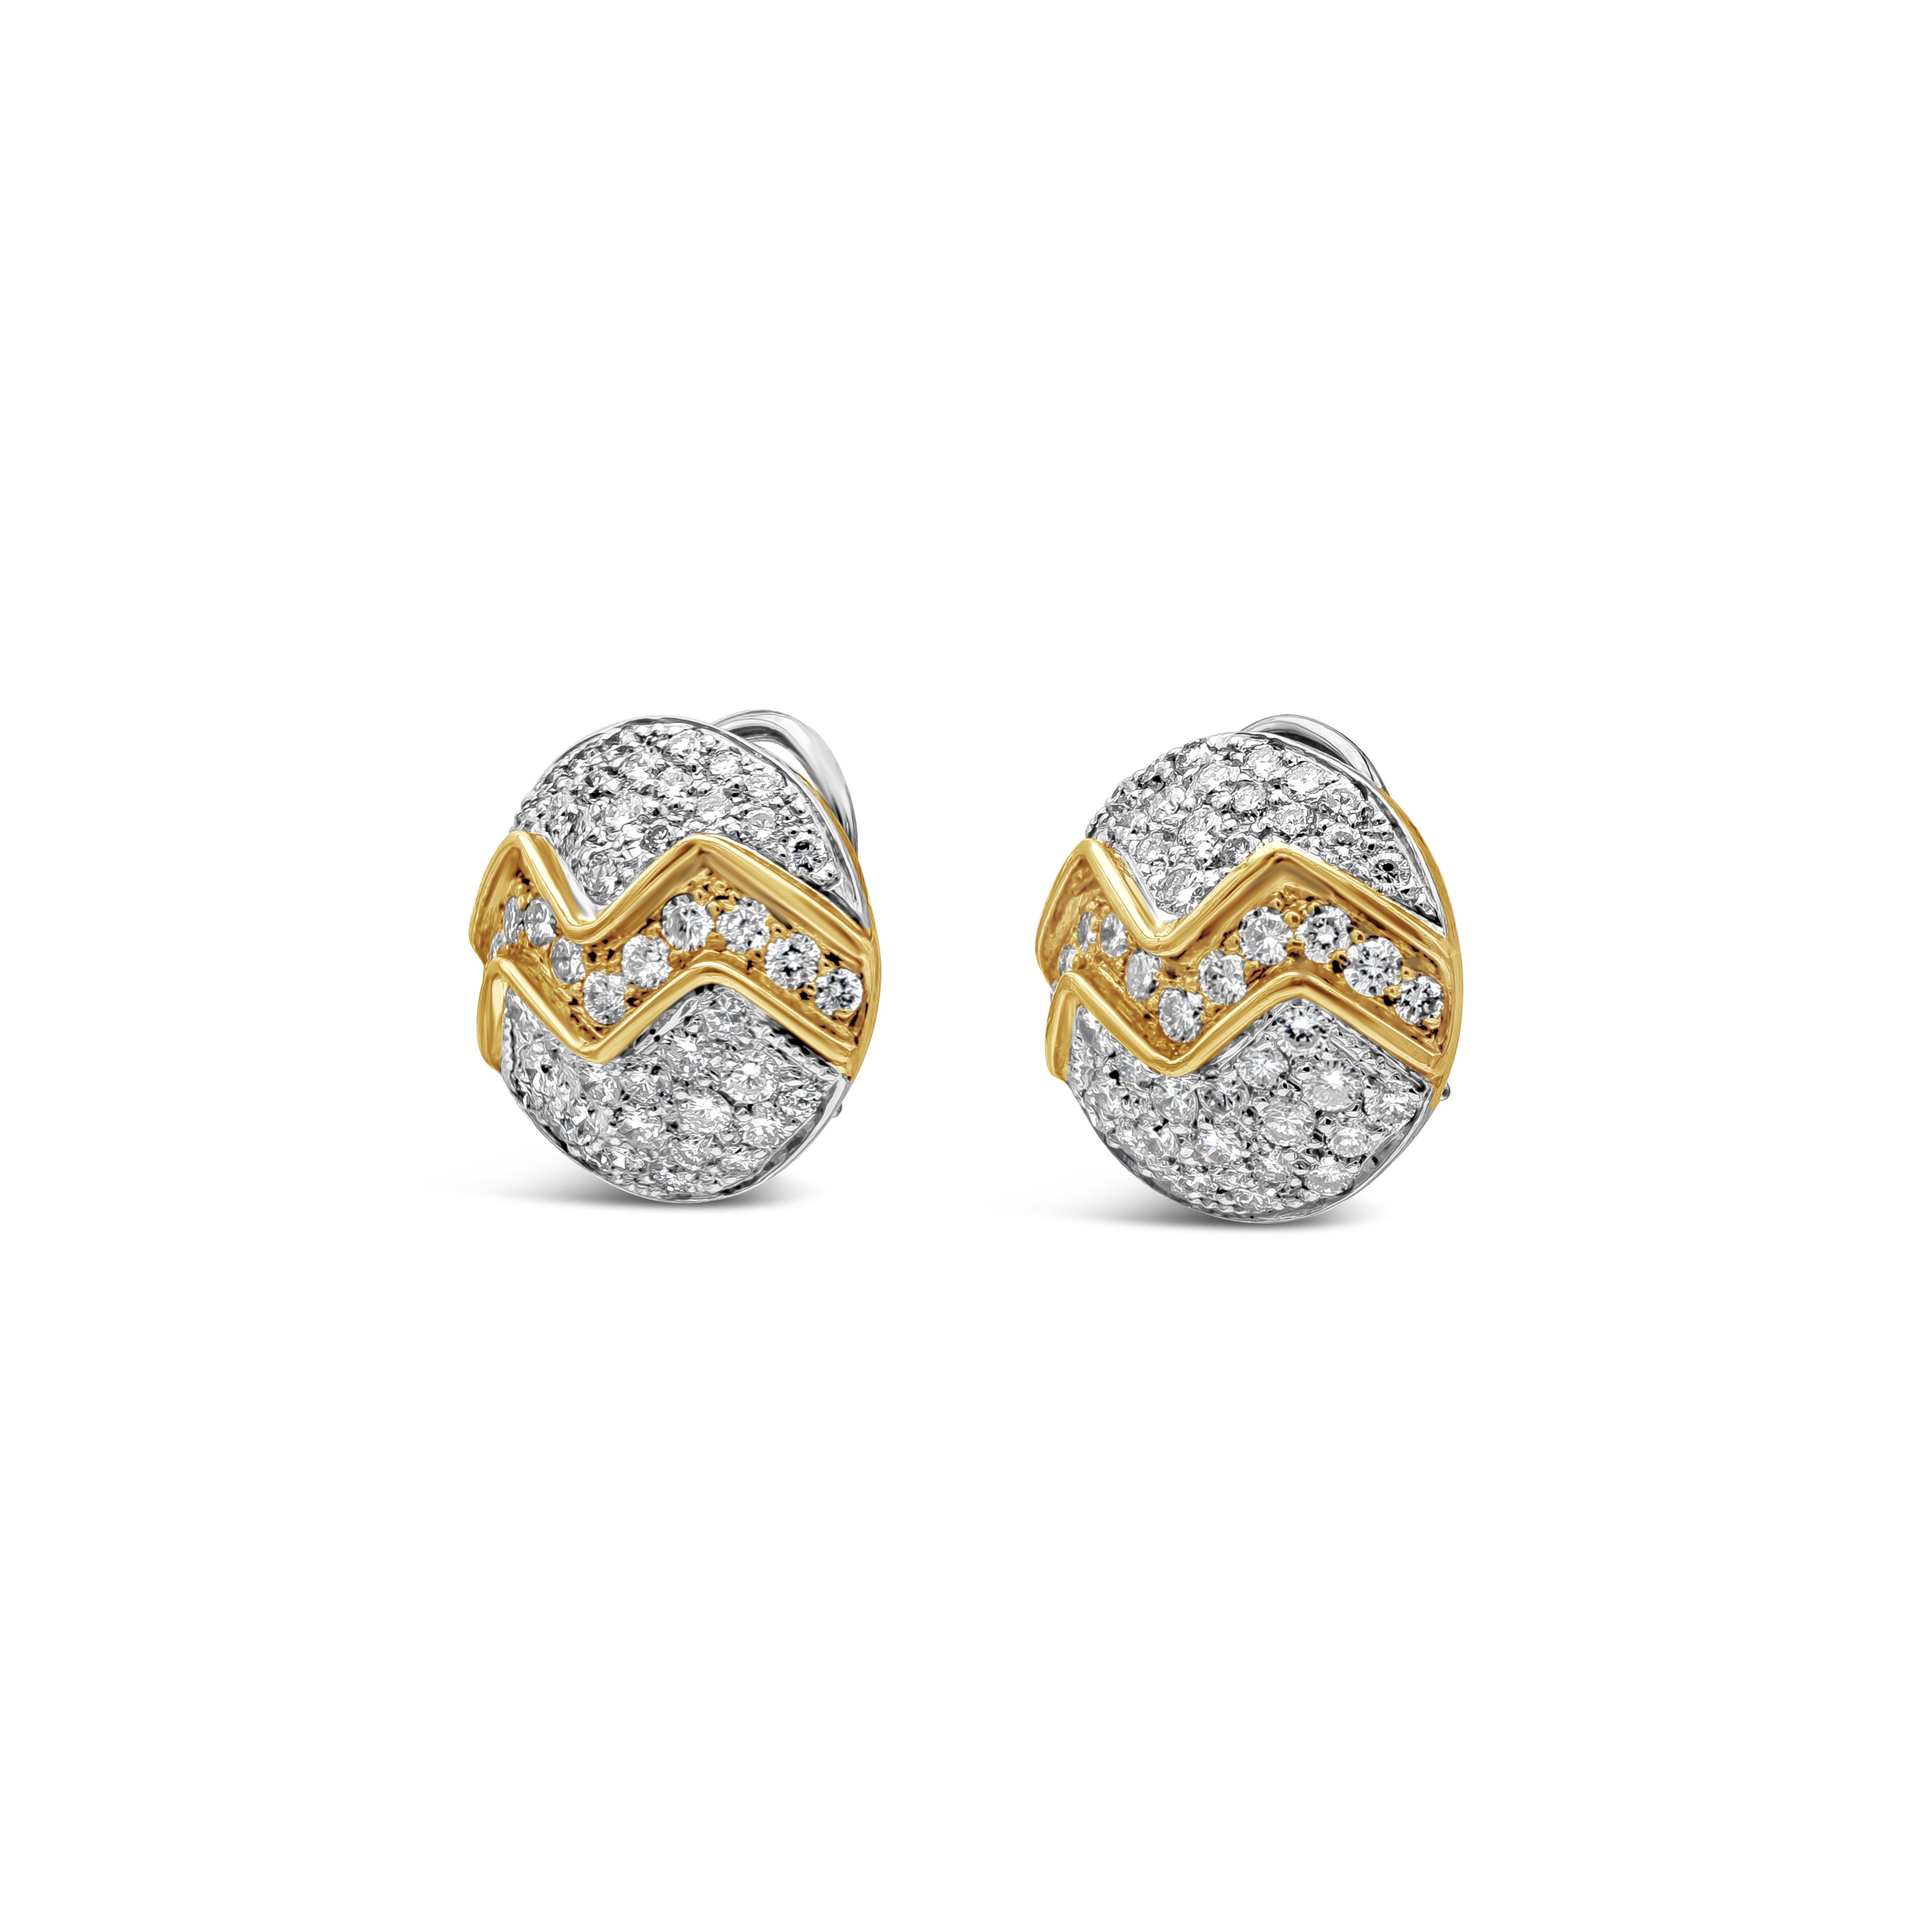 This simple but sophistacted clip on earrings showcase a cluster of white round brilliant diamonds weighing 4.02 total carats. Mounted in two tone 18 karats gold. This beautiful earrings are 0.75 inches in diameter.